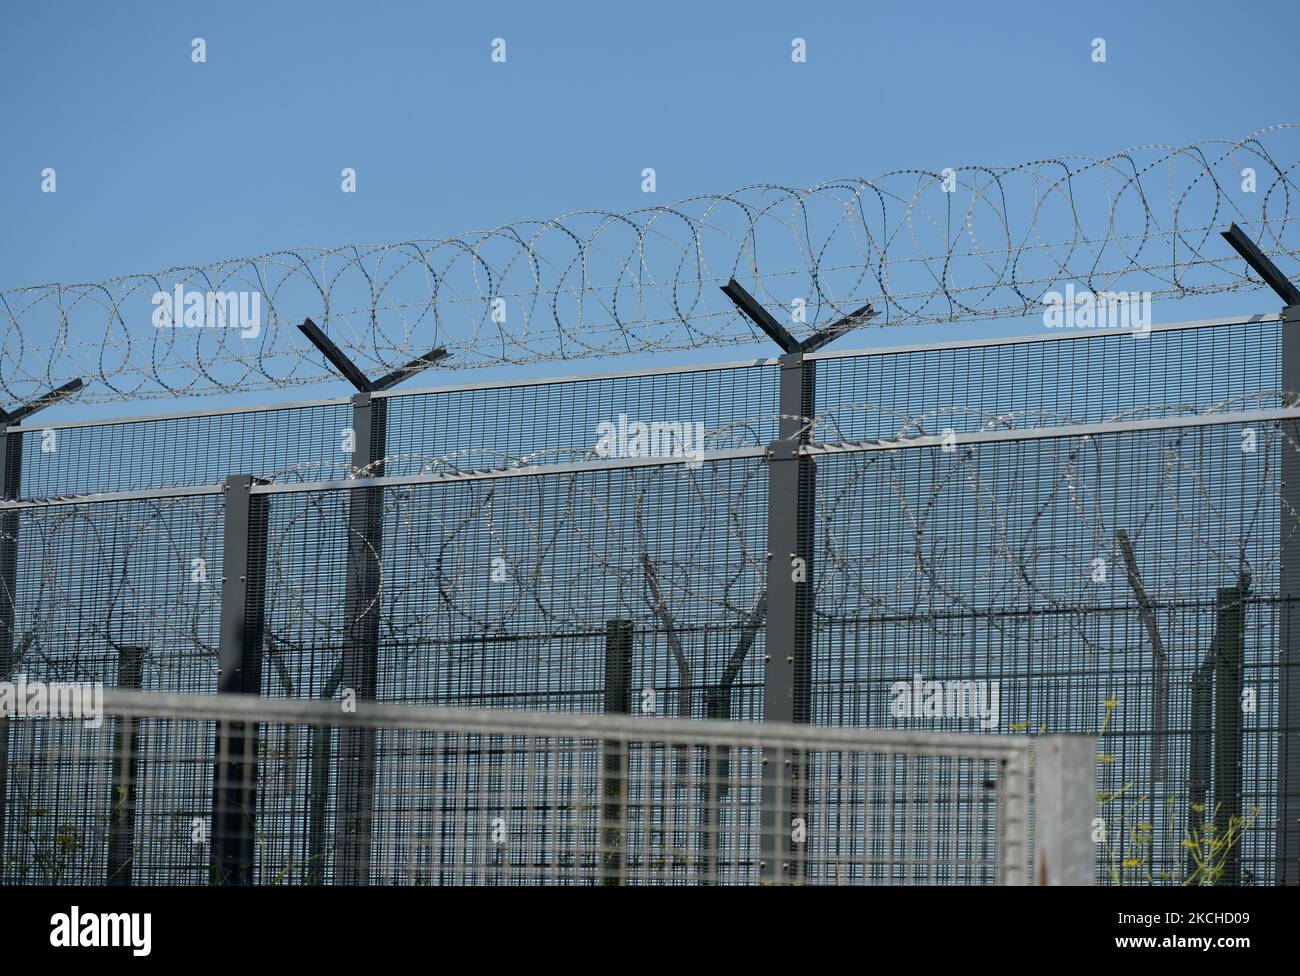 The security fences around Ouistreham ferry terminal. On Sunday, July 18, 2021, in Ouistreham, Calvados, Normandy, France. (Photo by Artur Widak/NurPhoto) Stock Photo